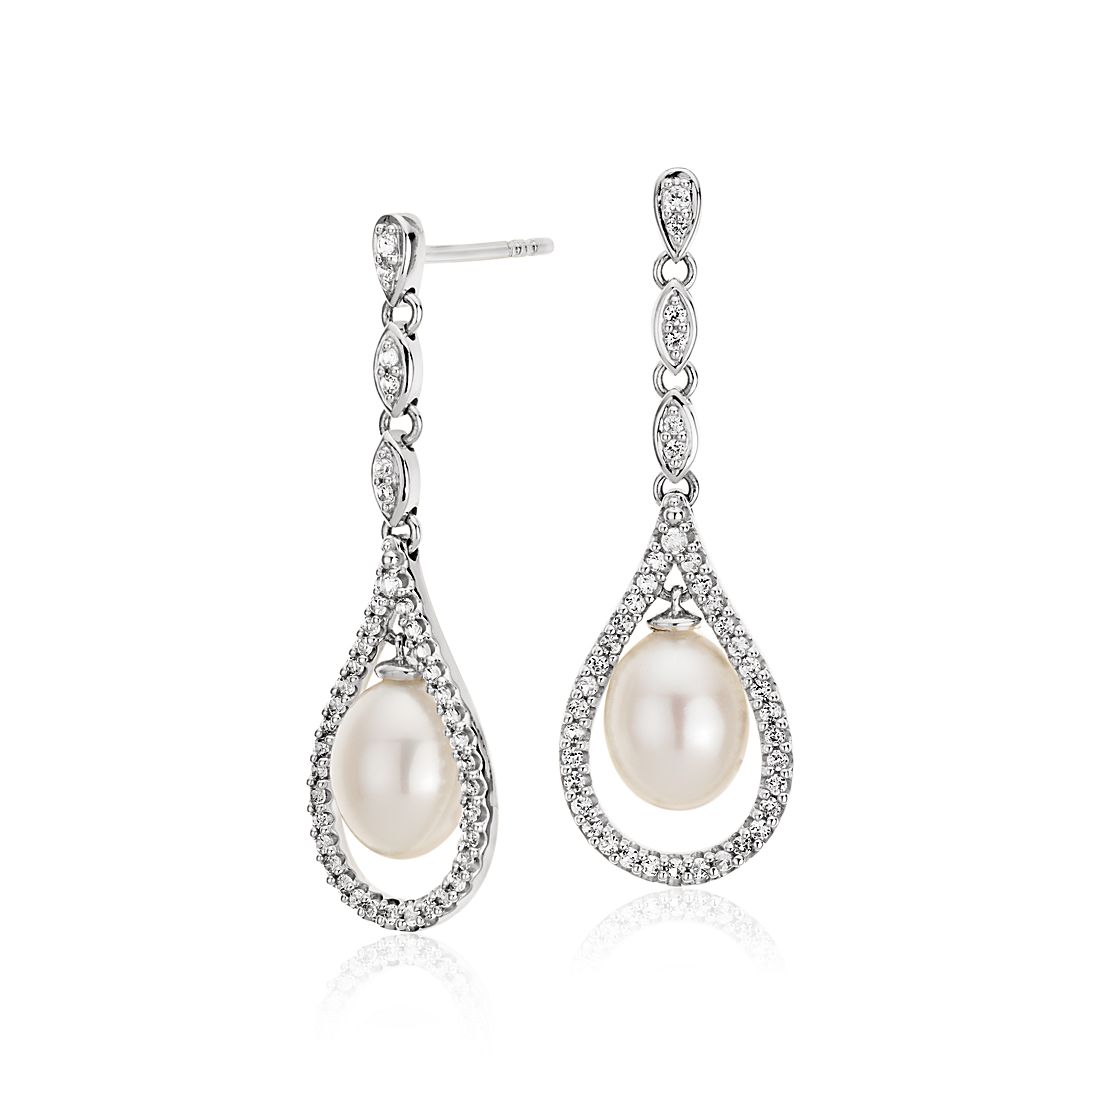 Vintage-Inspired Freshwater Cultured Pearl and White Topaz Earrings in Sterling Silver